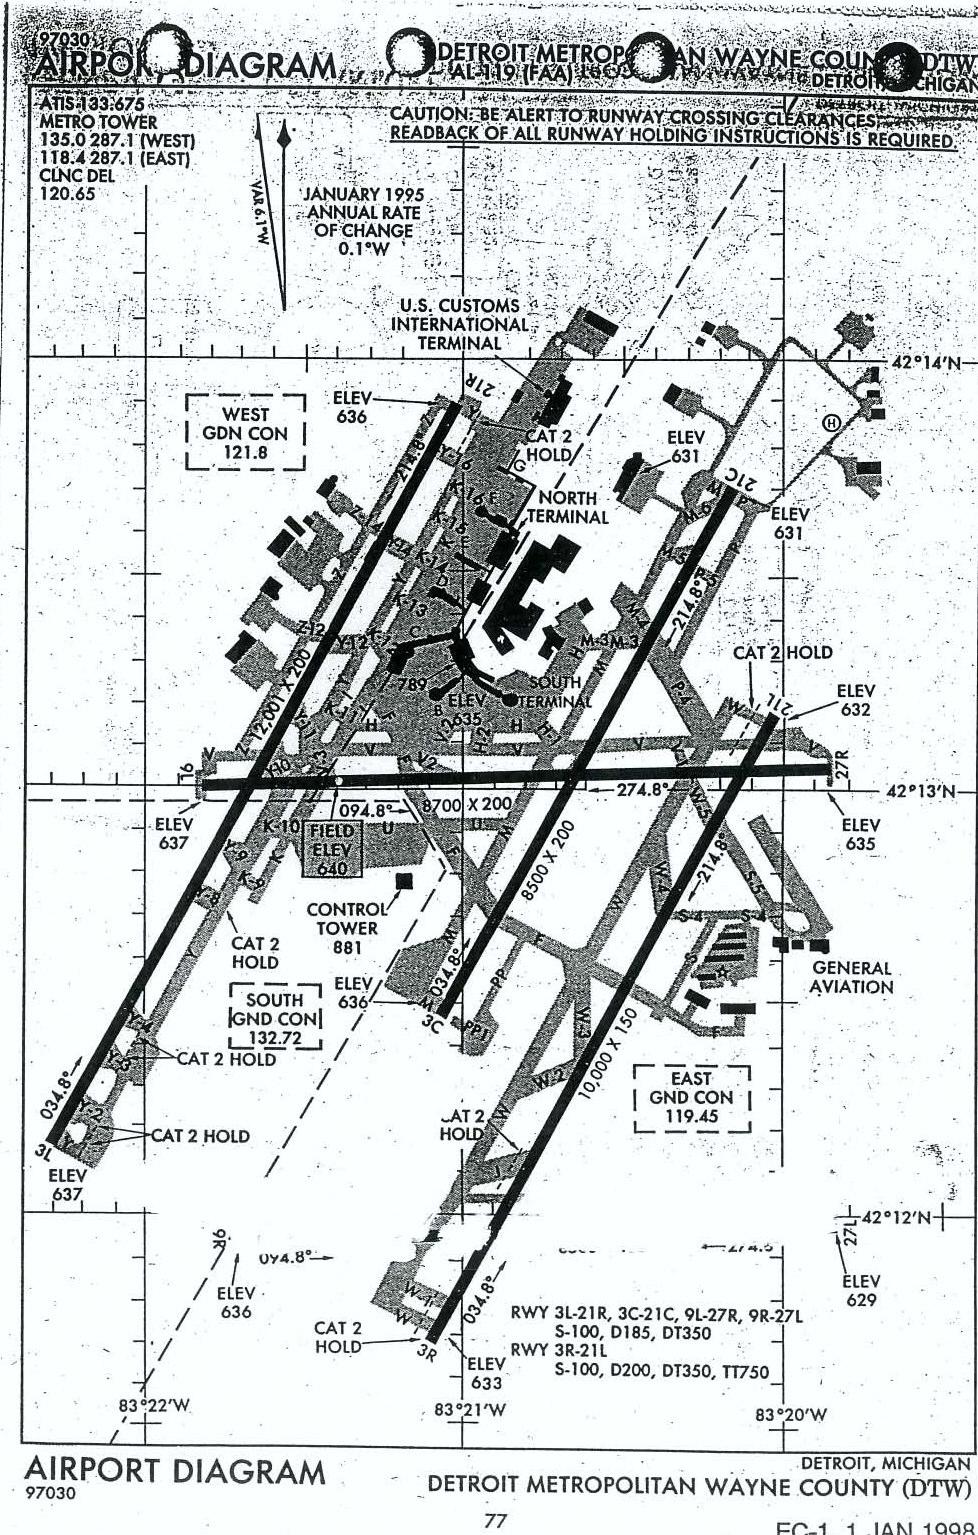 The Detroit Class B Airspace was originally designed in the 1970s and implemented as a Terminal Control Area (TCA).